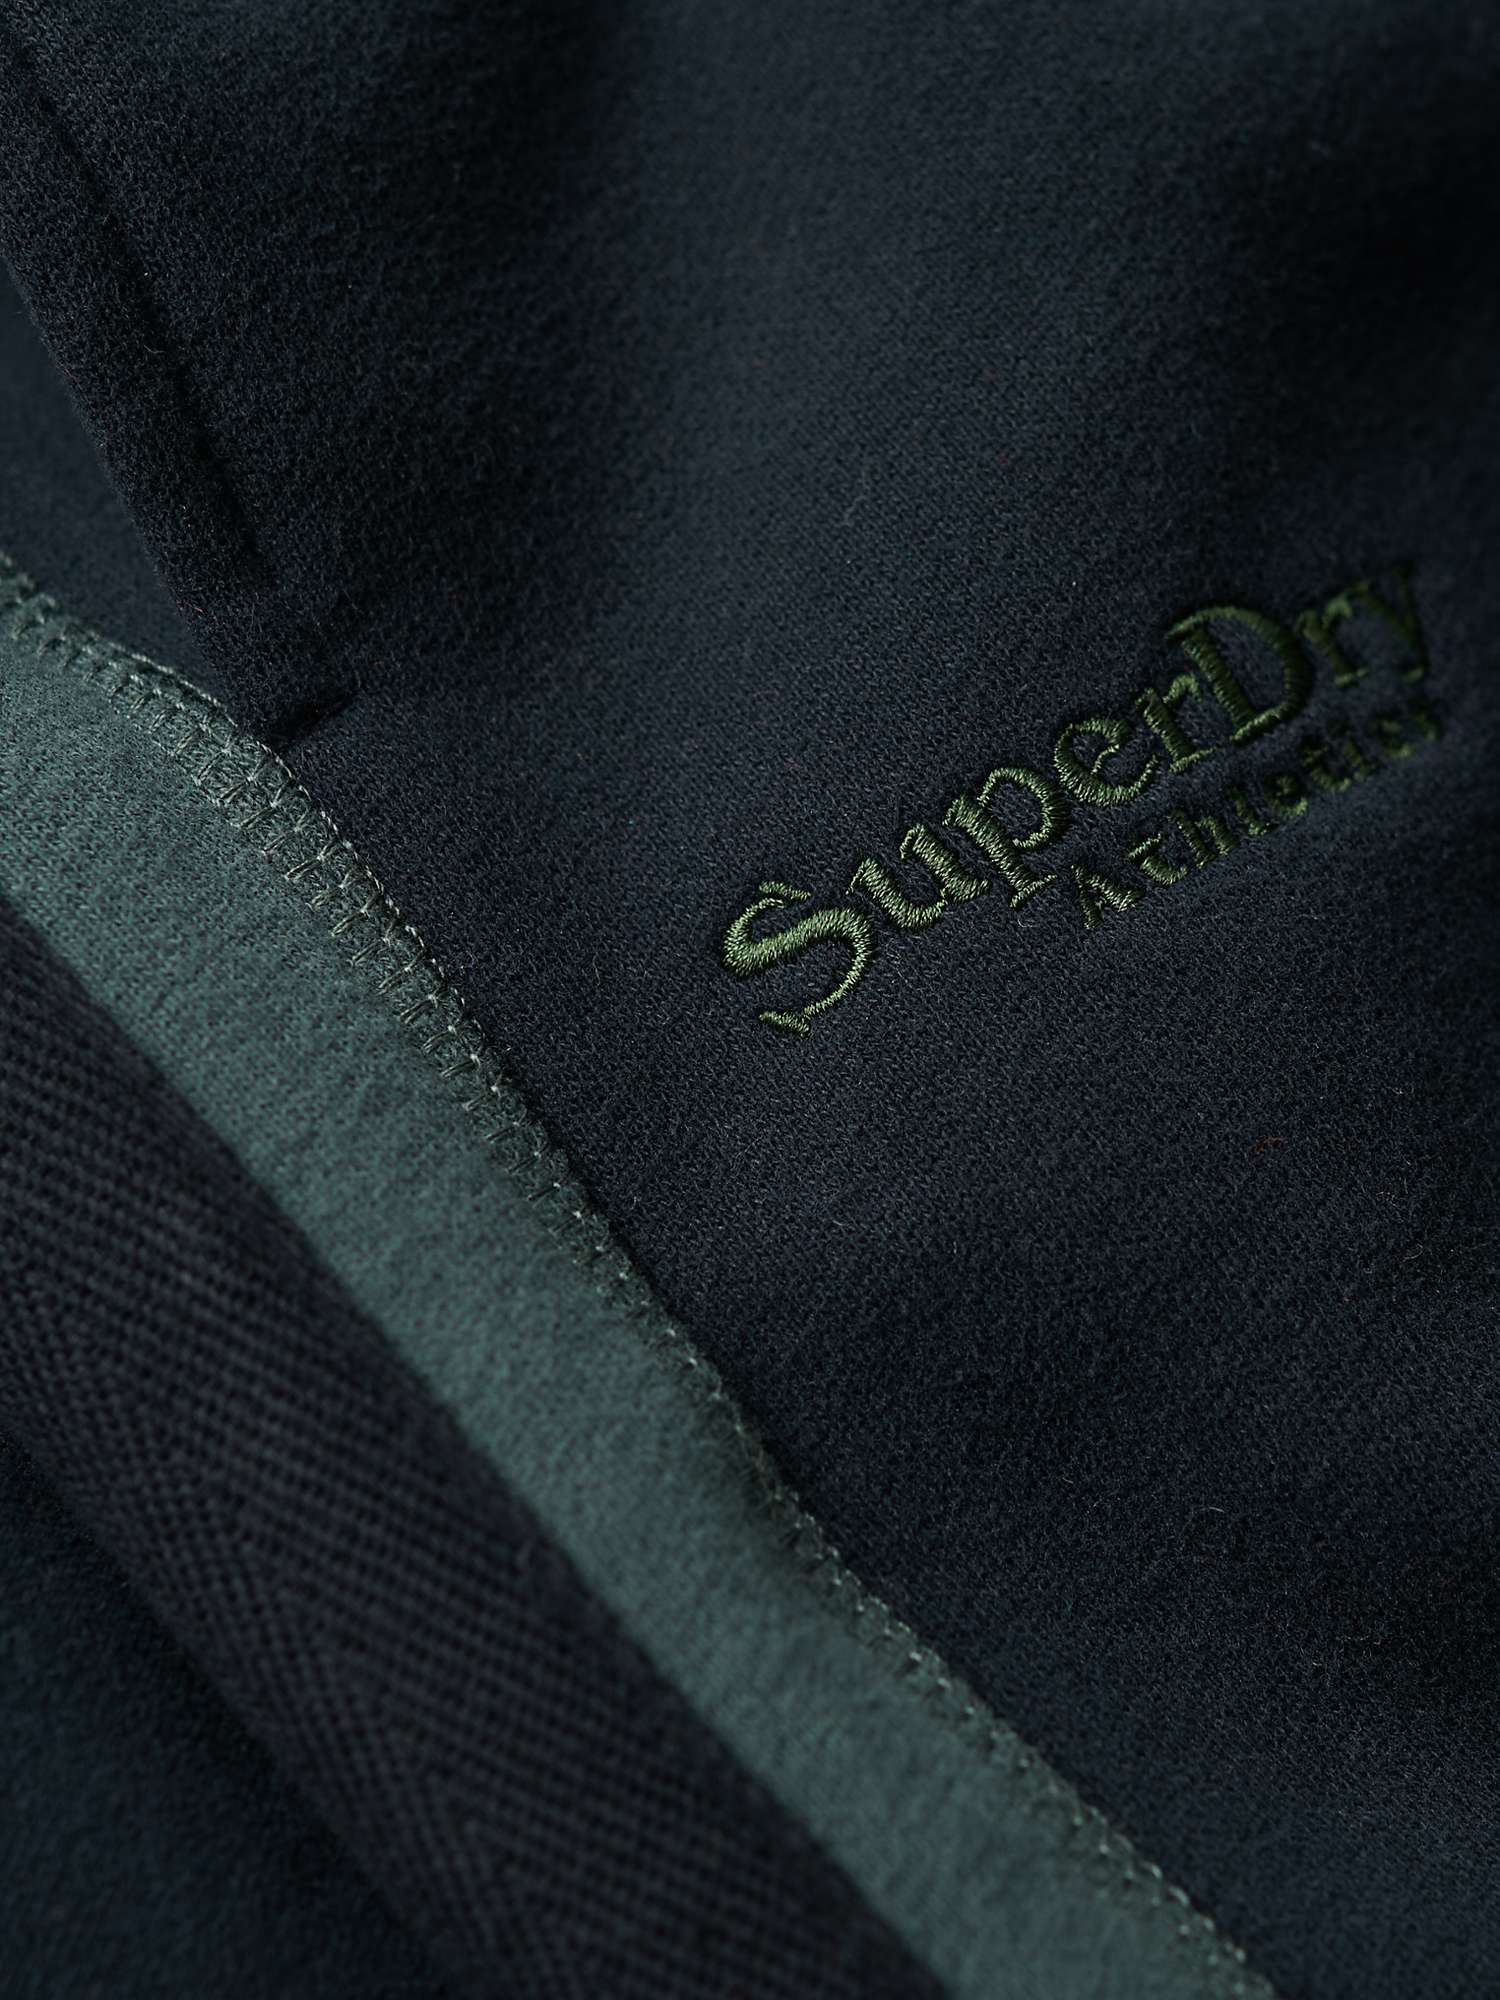 Buy Superdry Essential Straight Joggers Online at johnlewis.com